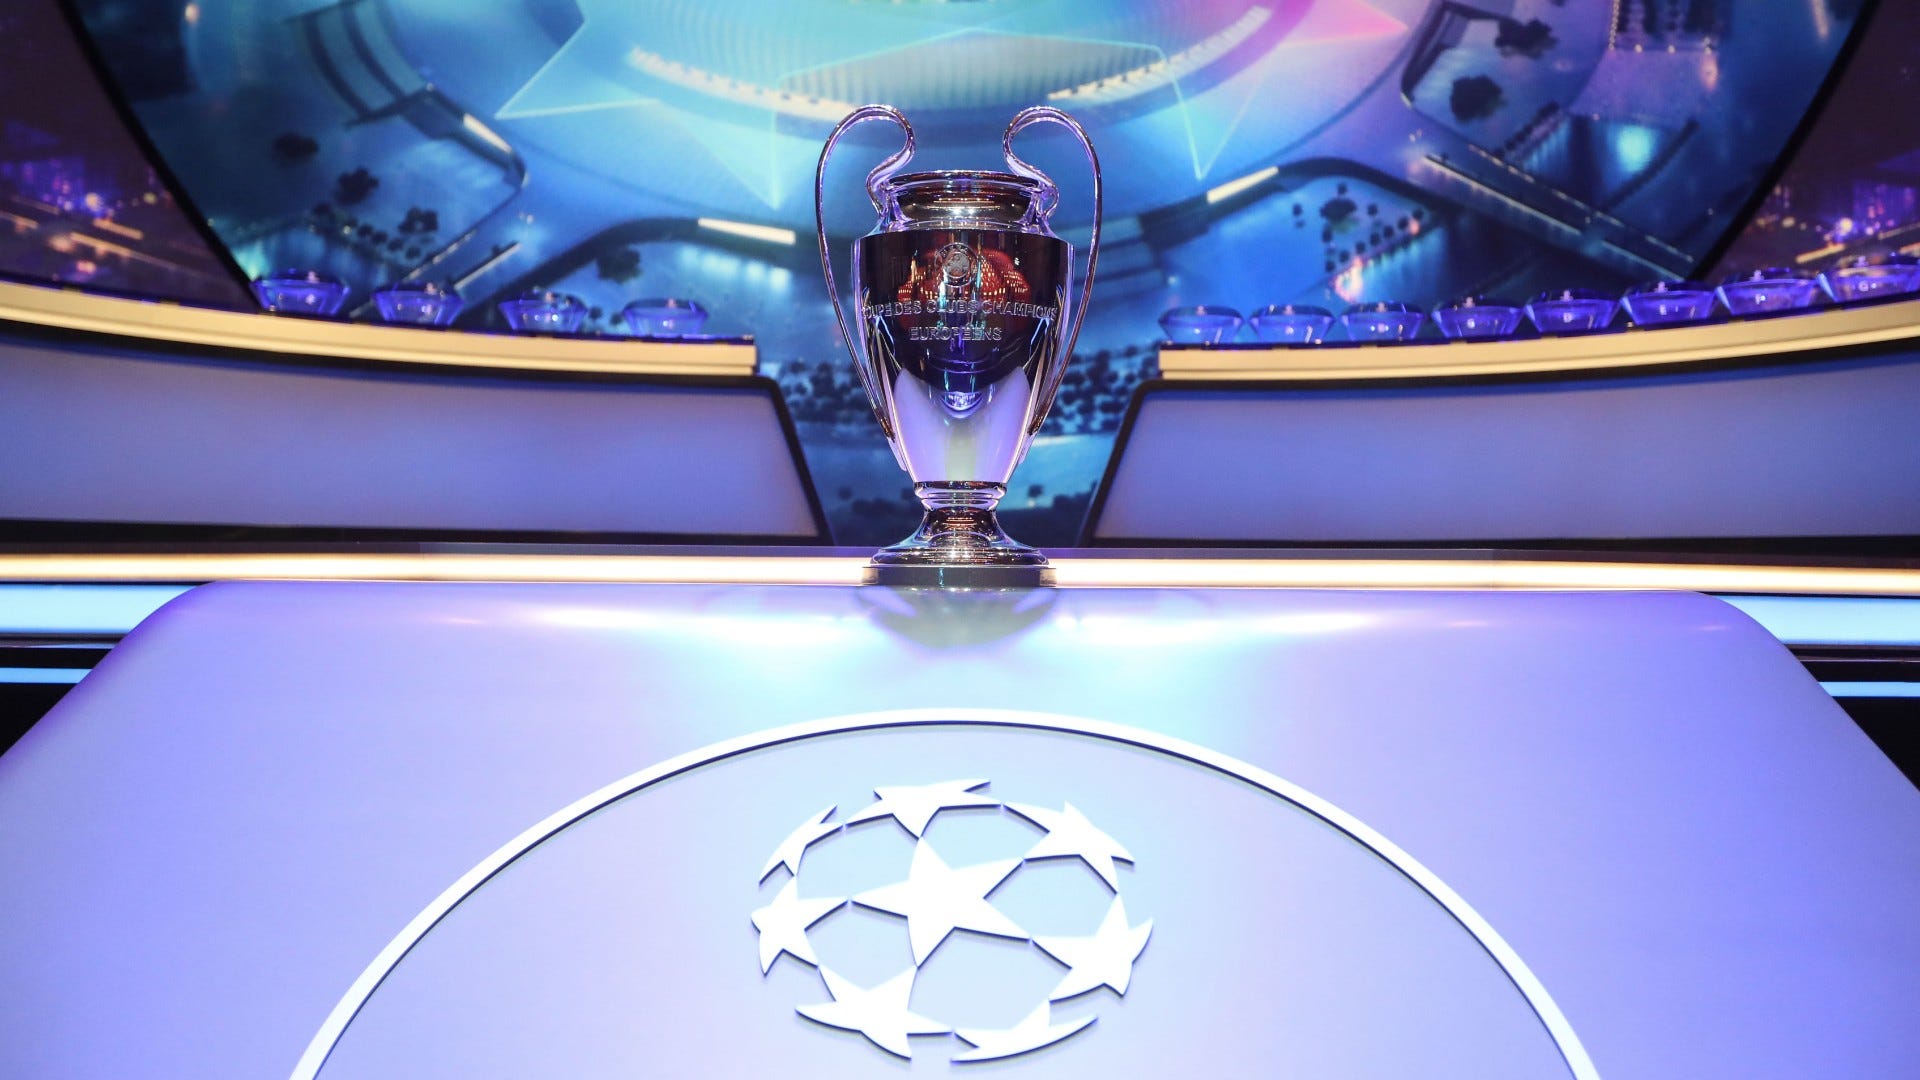 The Champions League Trophy stands on display during the UEFA Champions League football group stage 